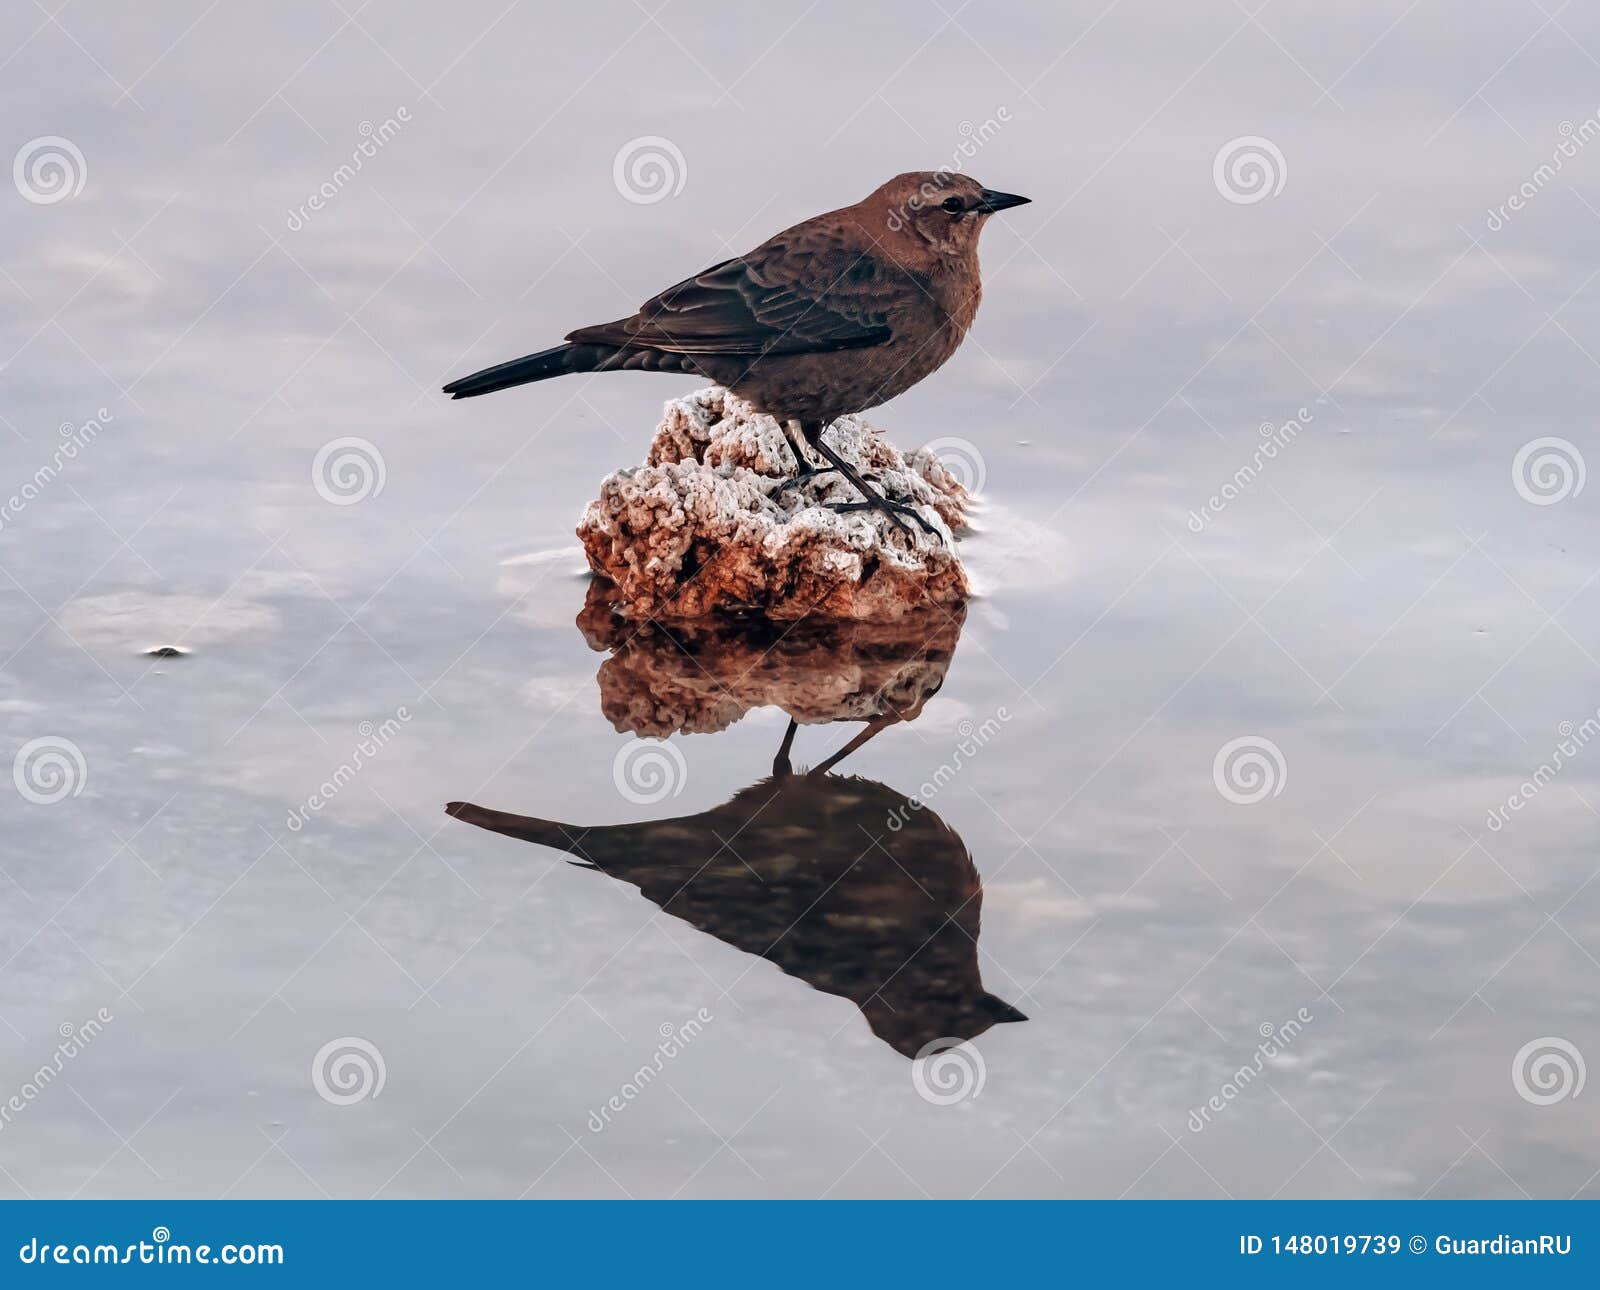 Profile Photo of a Dipper Bird on a Rock with Mirror Reflection in